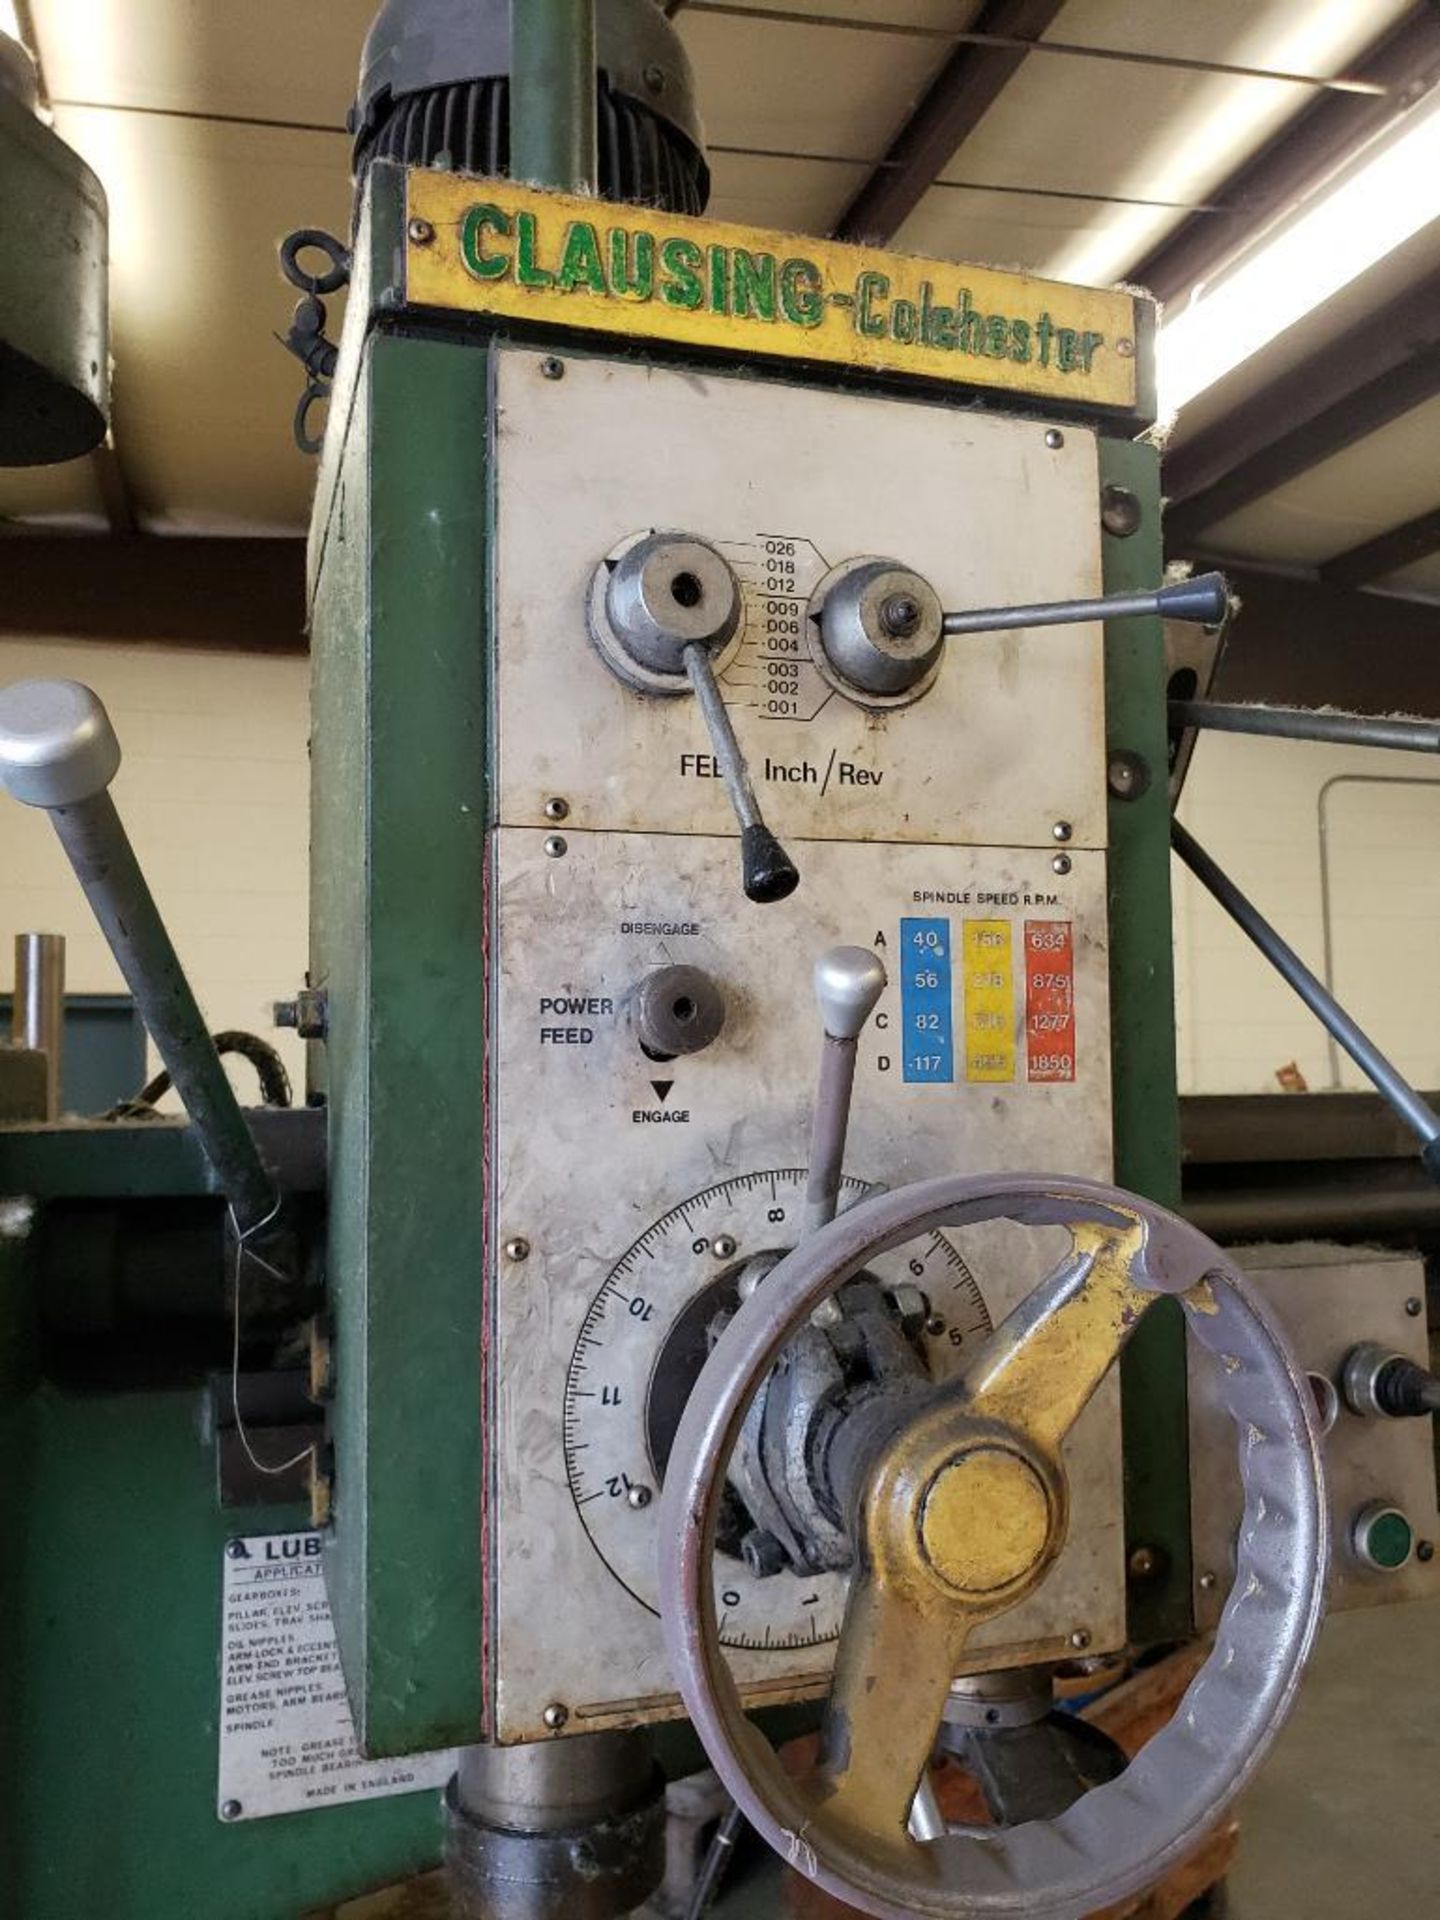 Clausing Colchester radial drill press. NO markings on drill for size. Appears to be 4ft x 12in. - Image 6 of 14